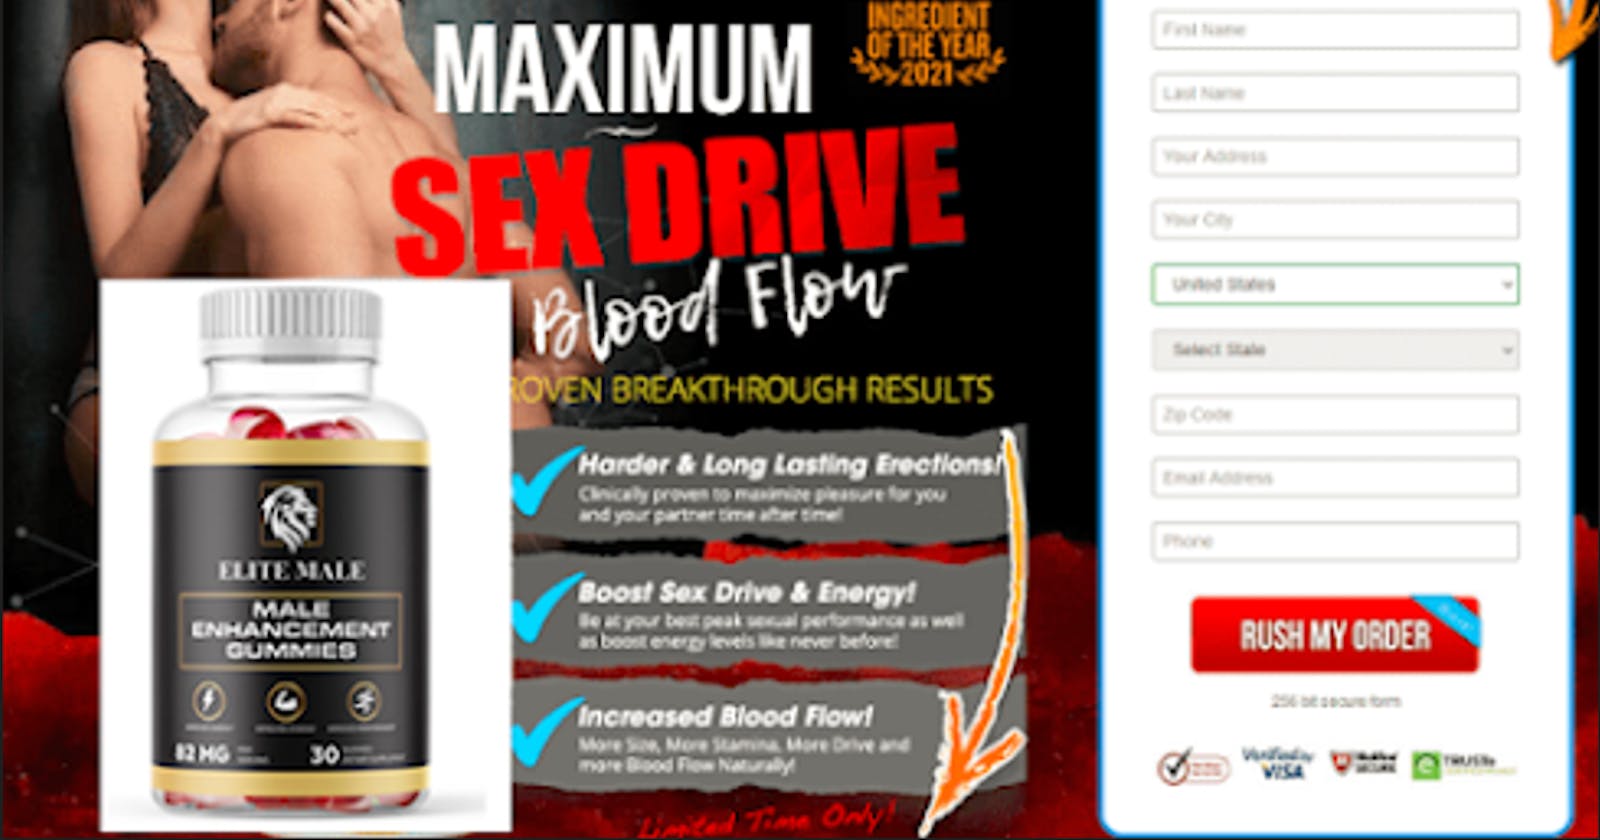 Elite Male Enhancement Reviews: Legit or Fake? What Do Customers Say?